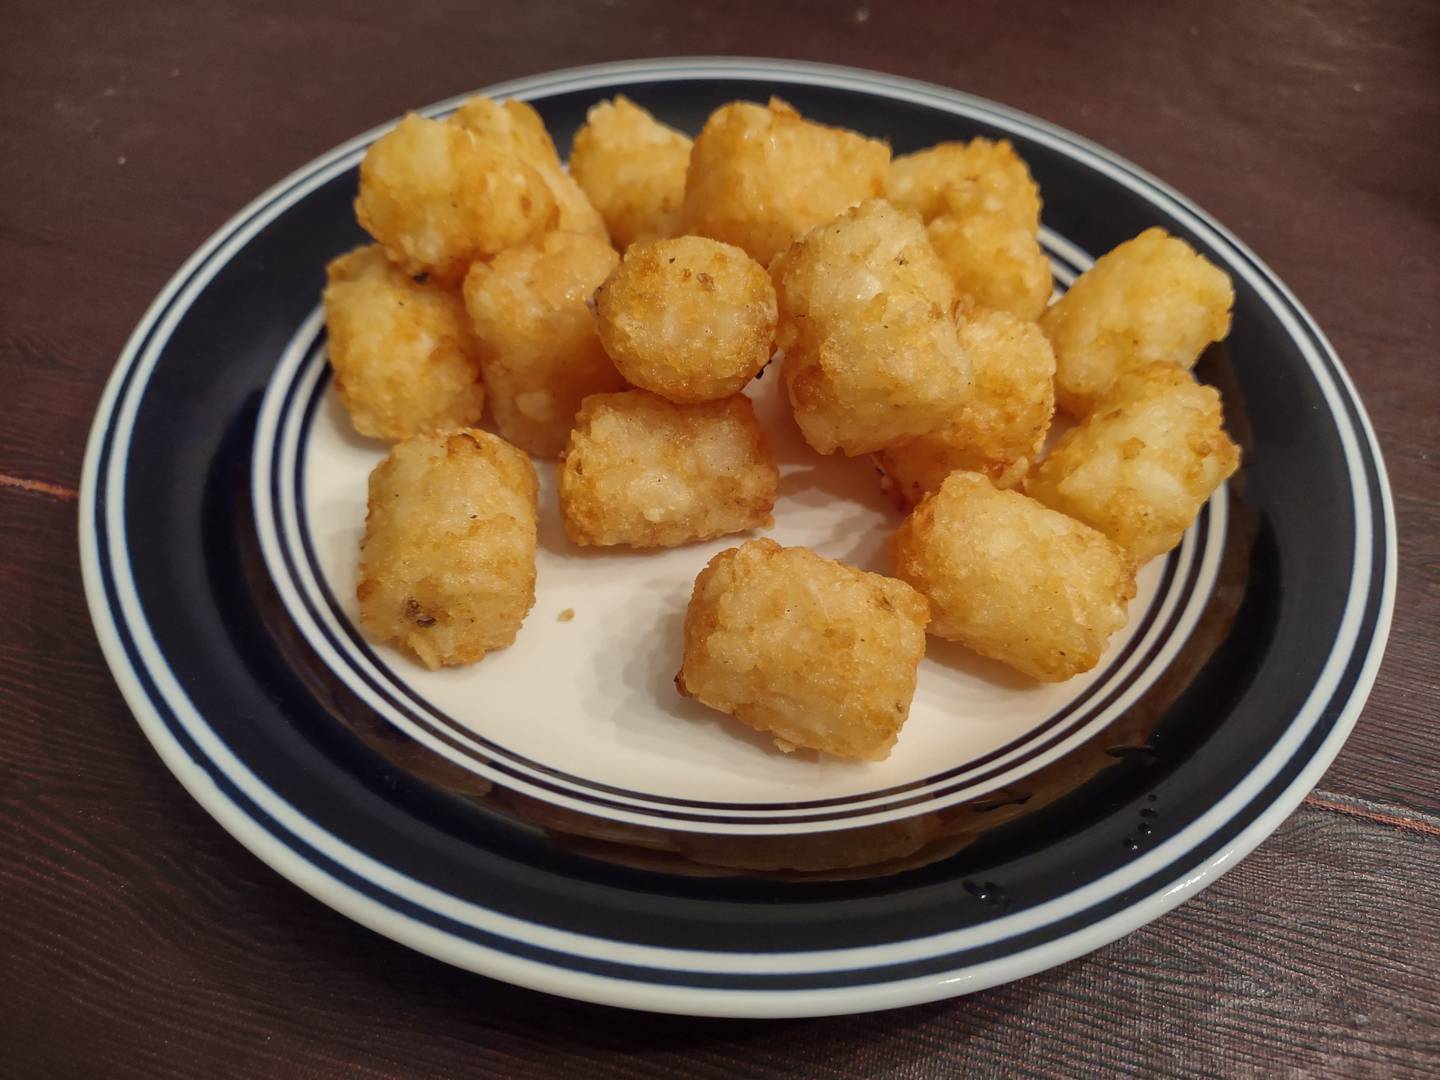 The tater tots at Broadway Pub in Streator are a great add-on to any sandwich.